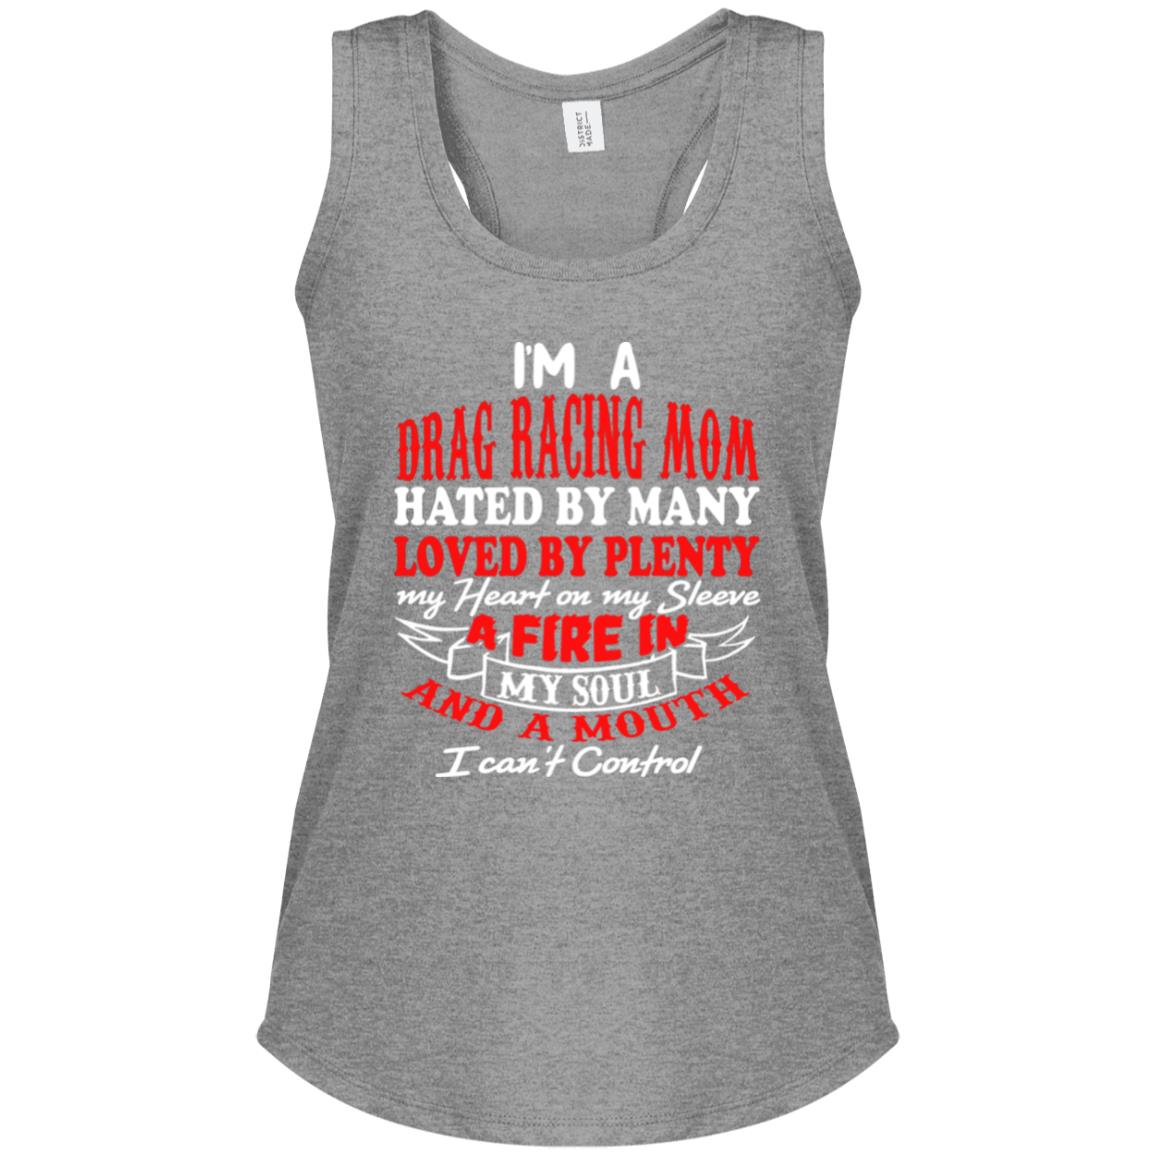 I'm A Drag Racing Mom Hated By Many Loved By Plenty Women's Perfect Tri Racerback Tank